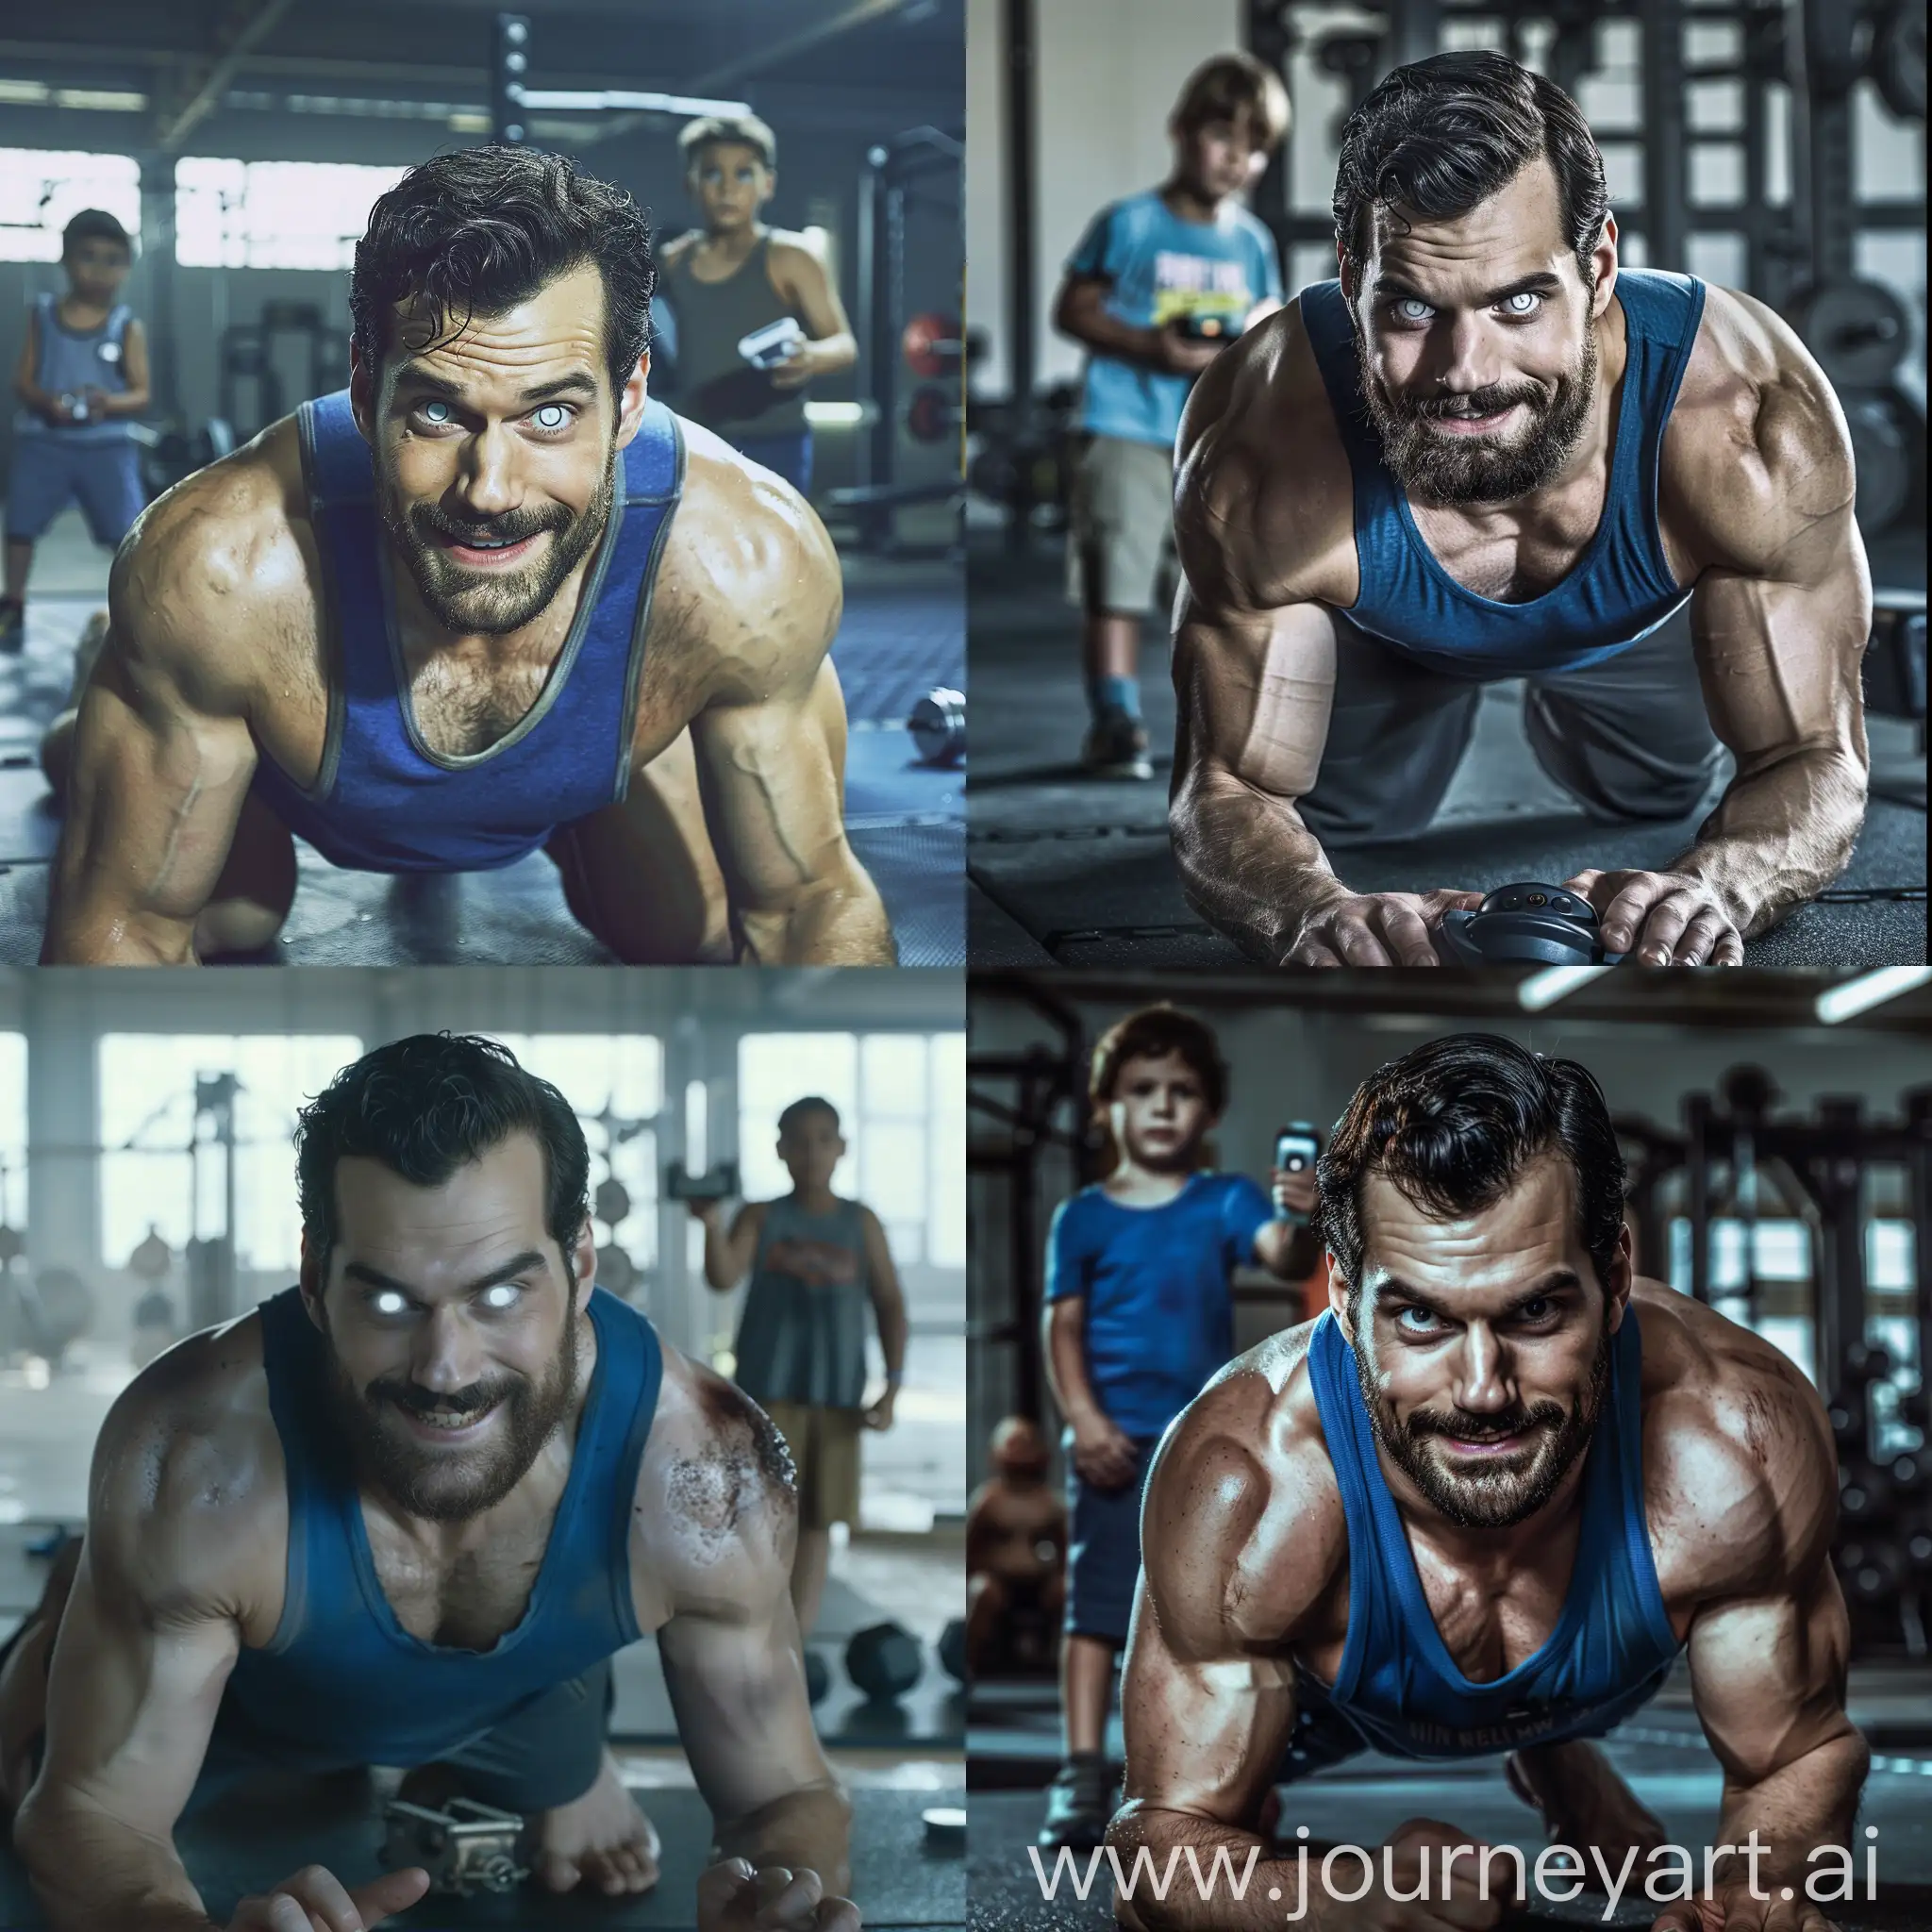 Muscular-Henry-Cavill-Crawling-in-Gym-Scene-with-Young-Overweight-Boy-Holding-Remote